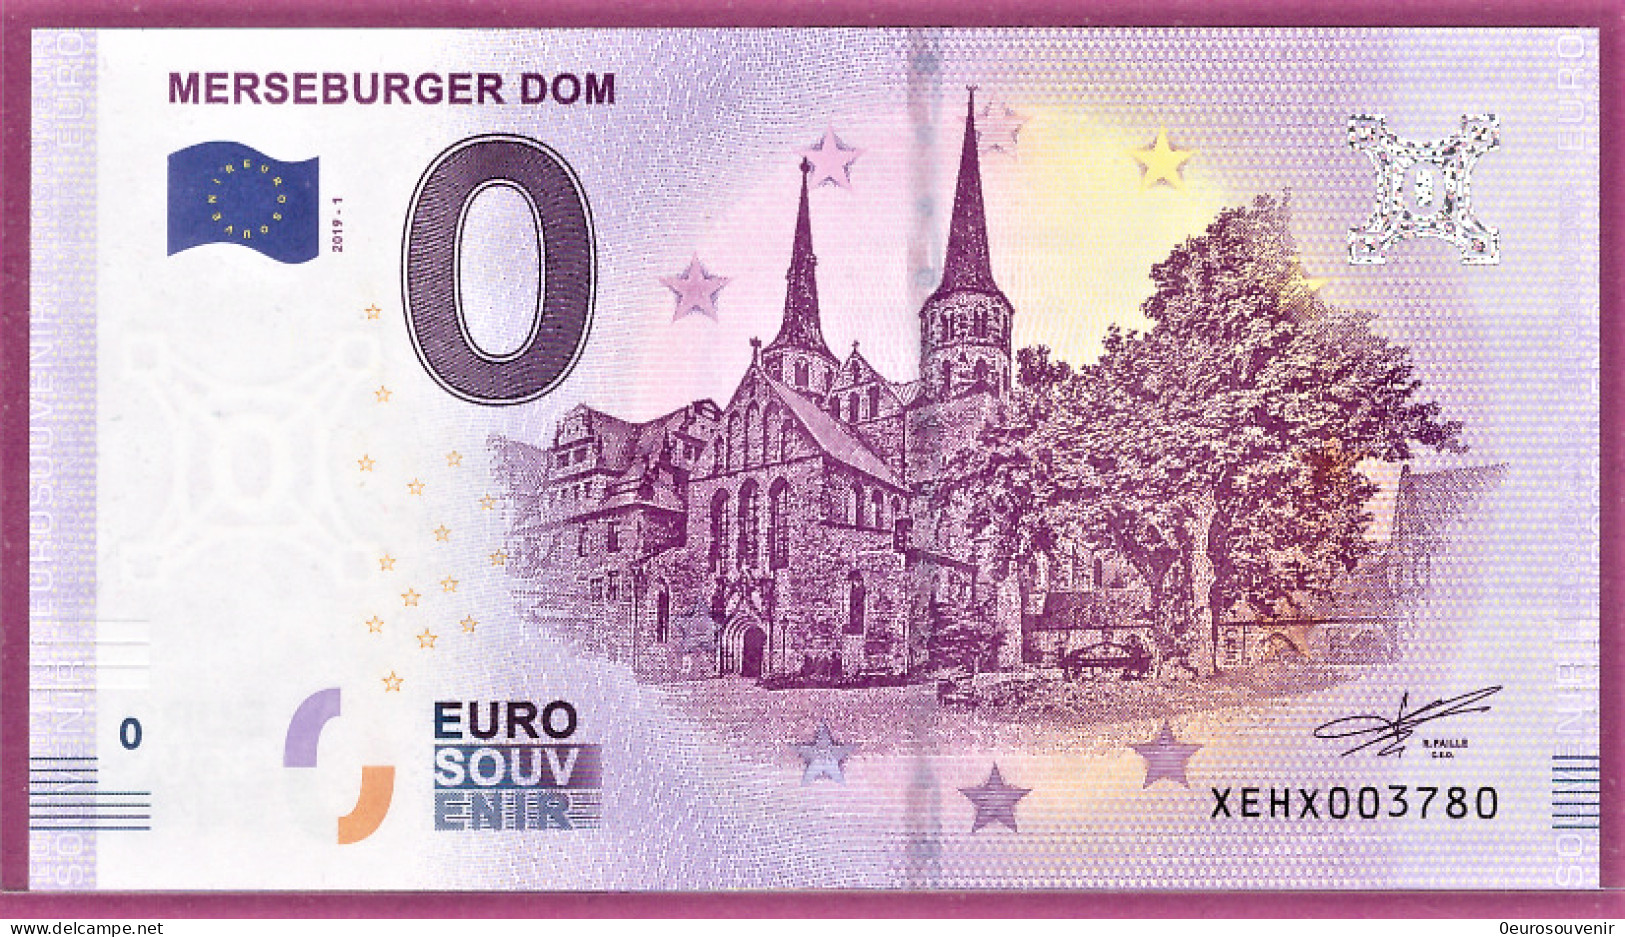 0-Euro XEHX 2019-1 MERSEBURGER DOM - Private Proofs / Unofficial